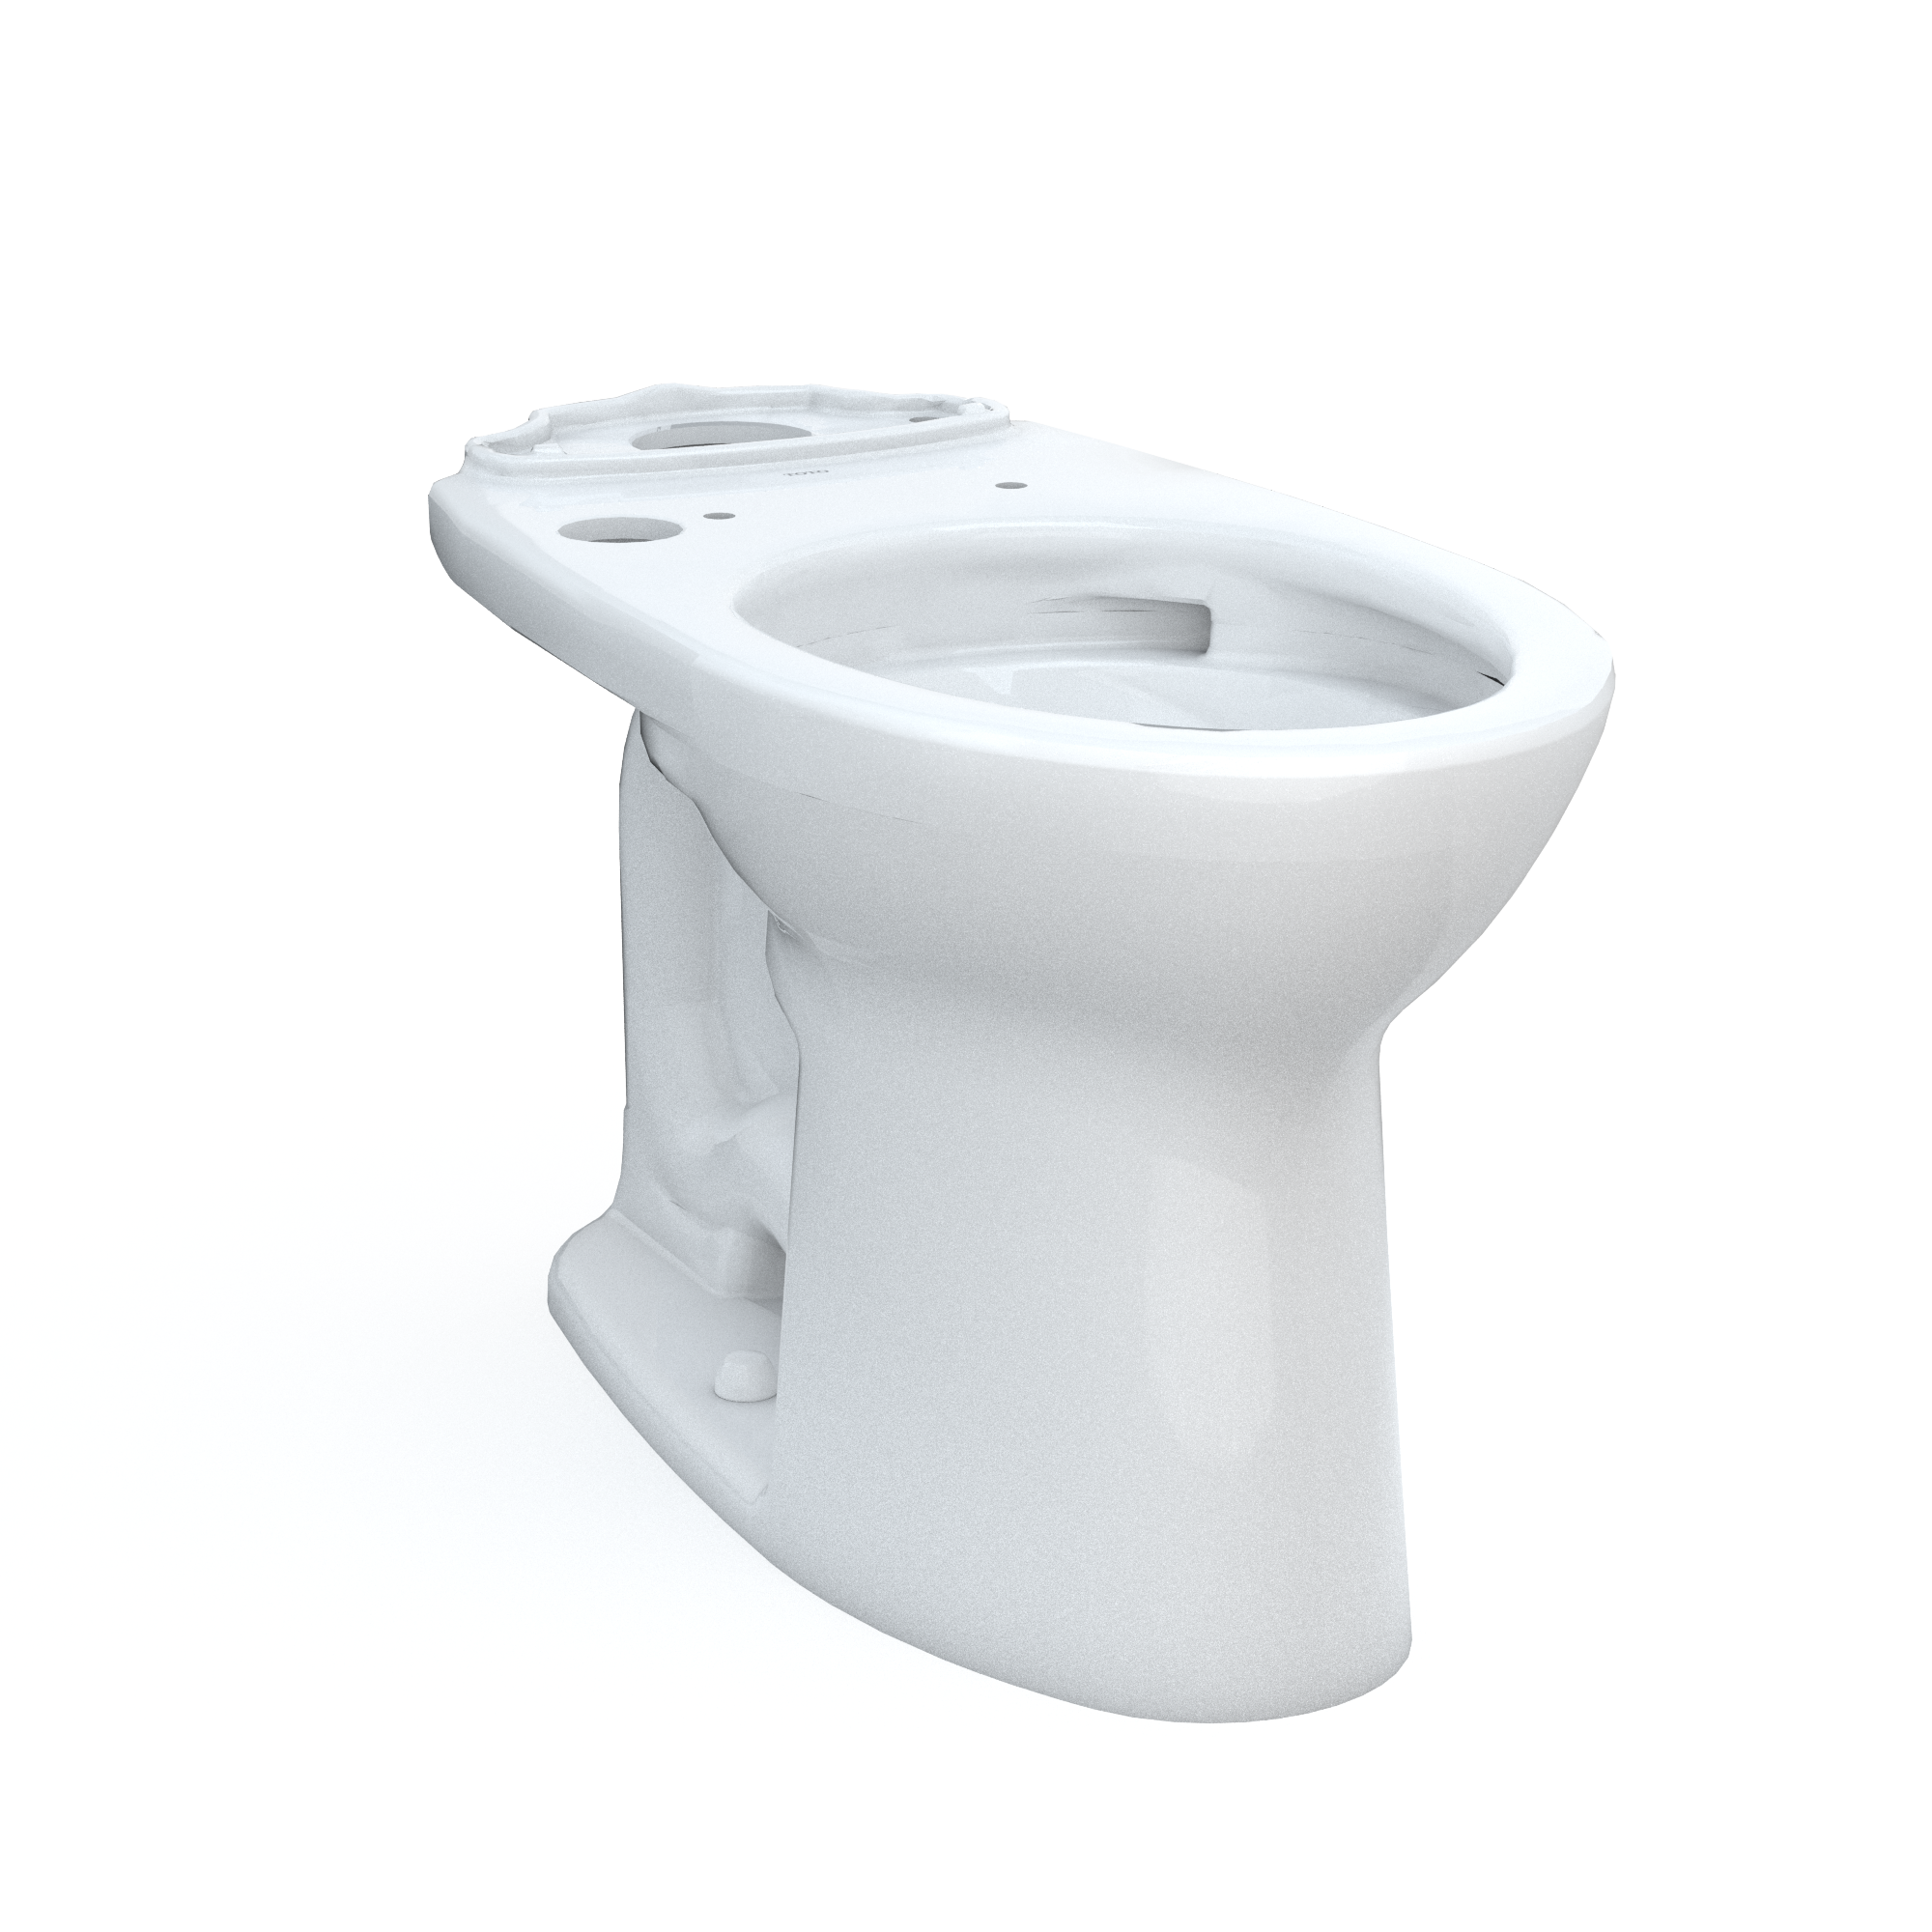 TOTO® Drake® Elongated Universal Height TORNADO FLUSH® Toilet Bowl with CEFIONTECT®, WASHLET®+ Ready, Cotton White - C776CEFGT40#01 - image 1 of 5